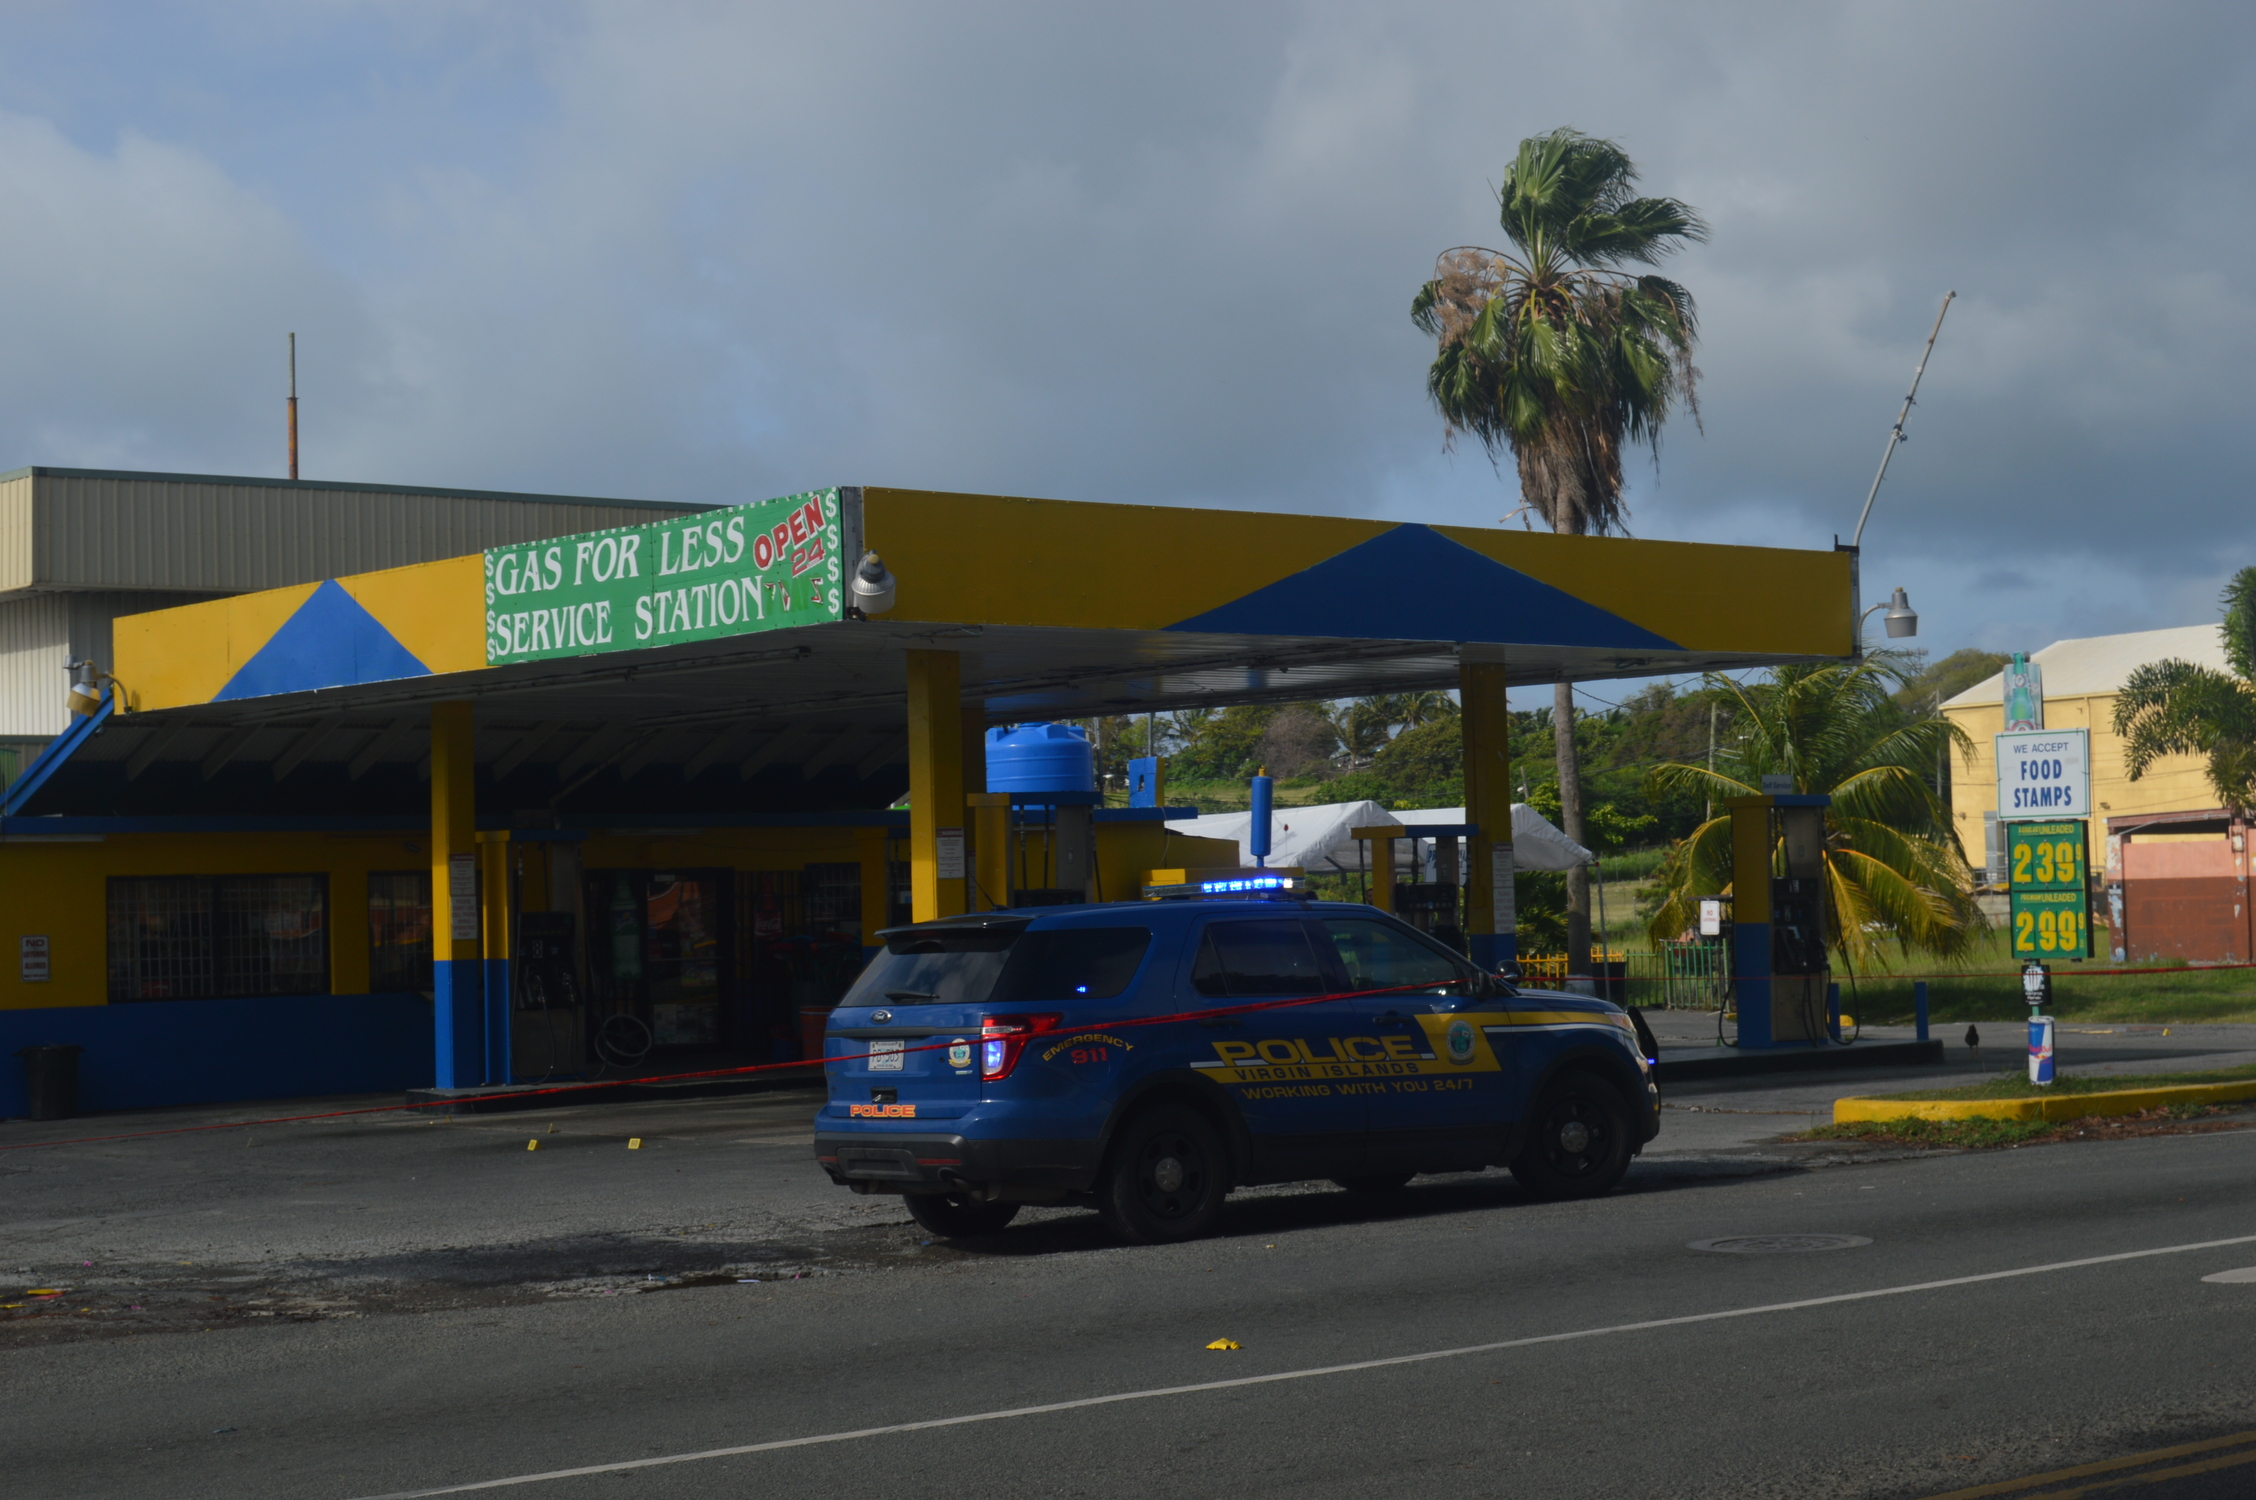 VIPD: St. Croix's Miguel Angel Cruz Found Shot To Death Behind Sunny Isle Gas Station